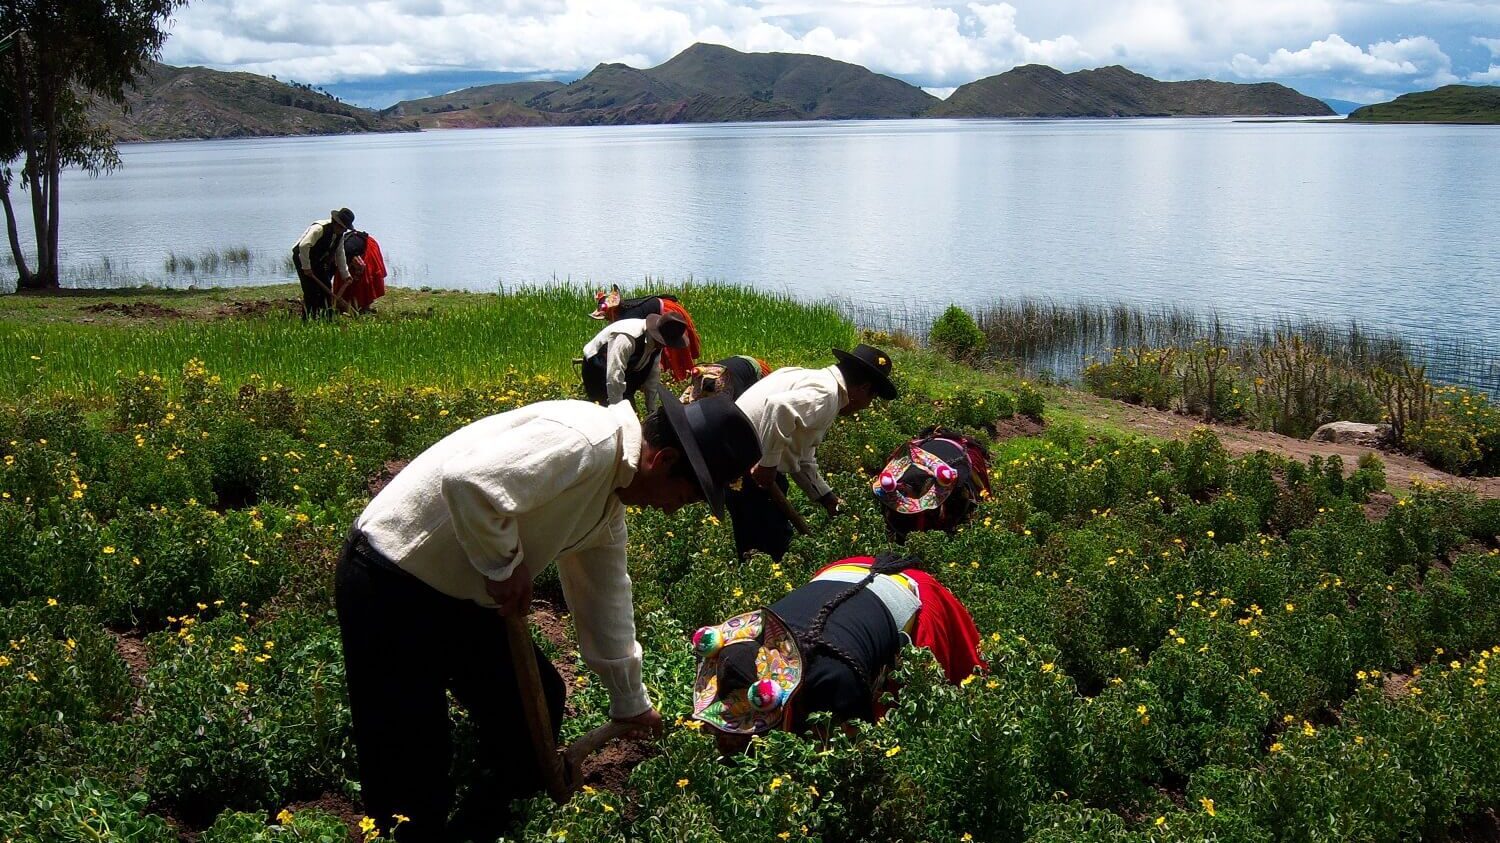 Couples in traditional clothes working together on their potatoe fields at the shores of Capachica peninsula in Lake Titicaca. | RESPONSible Travel Peru